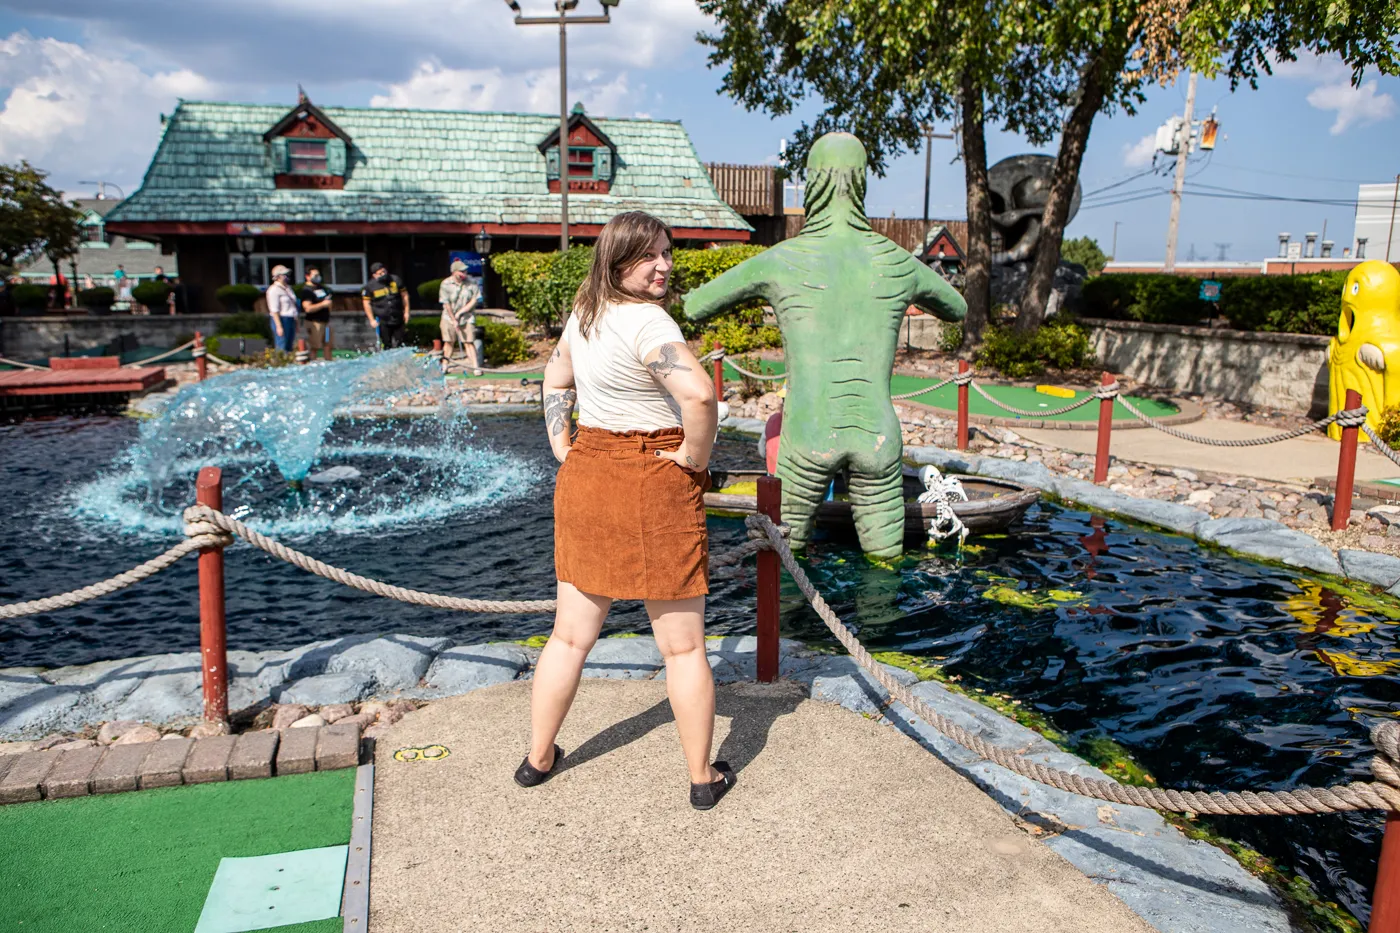 Creature from the black lagoon at Haunted Trails mini golf in Burbank, Illinois